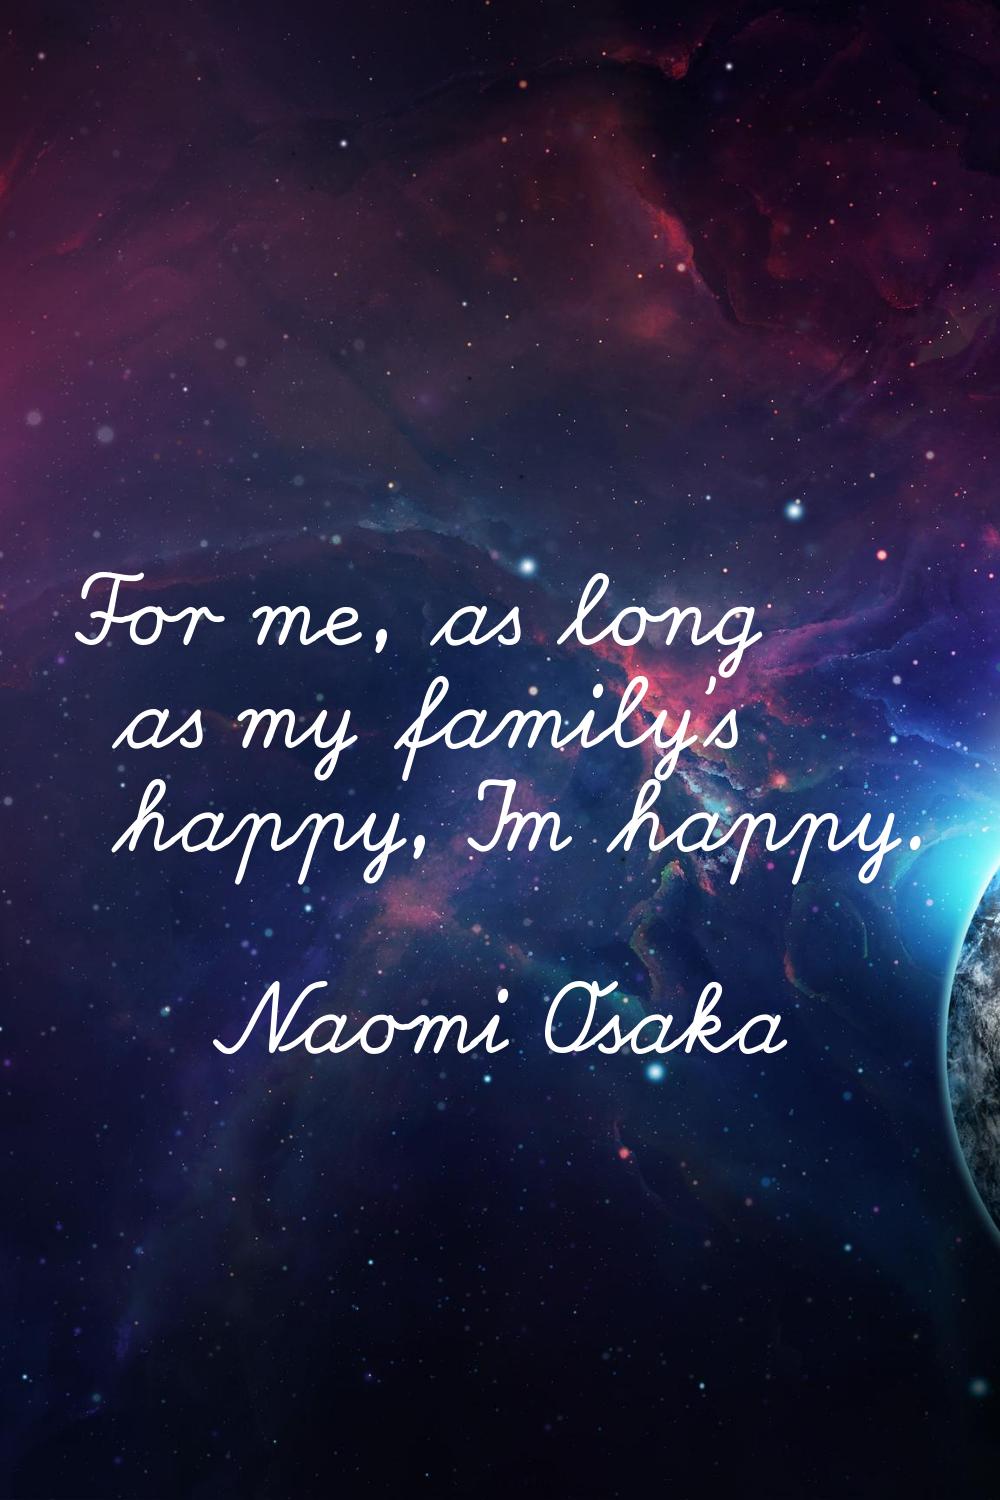 For me, as long as my family's happy, I'm happy.